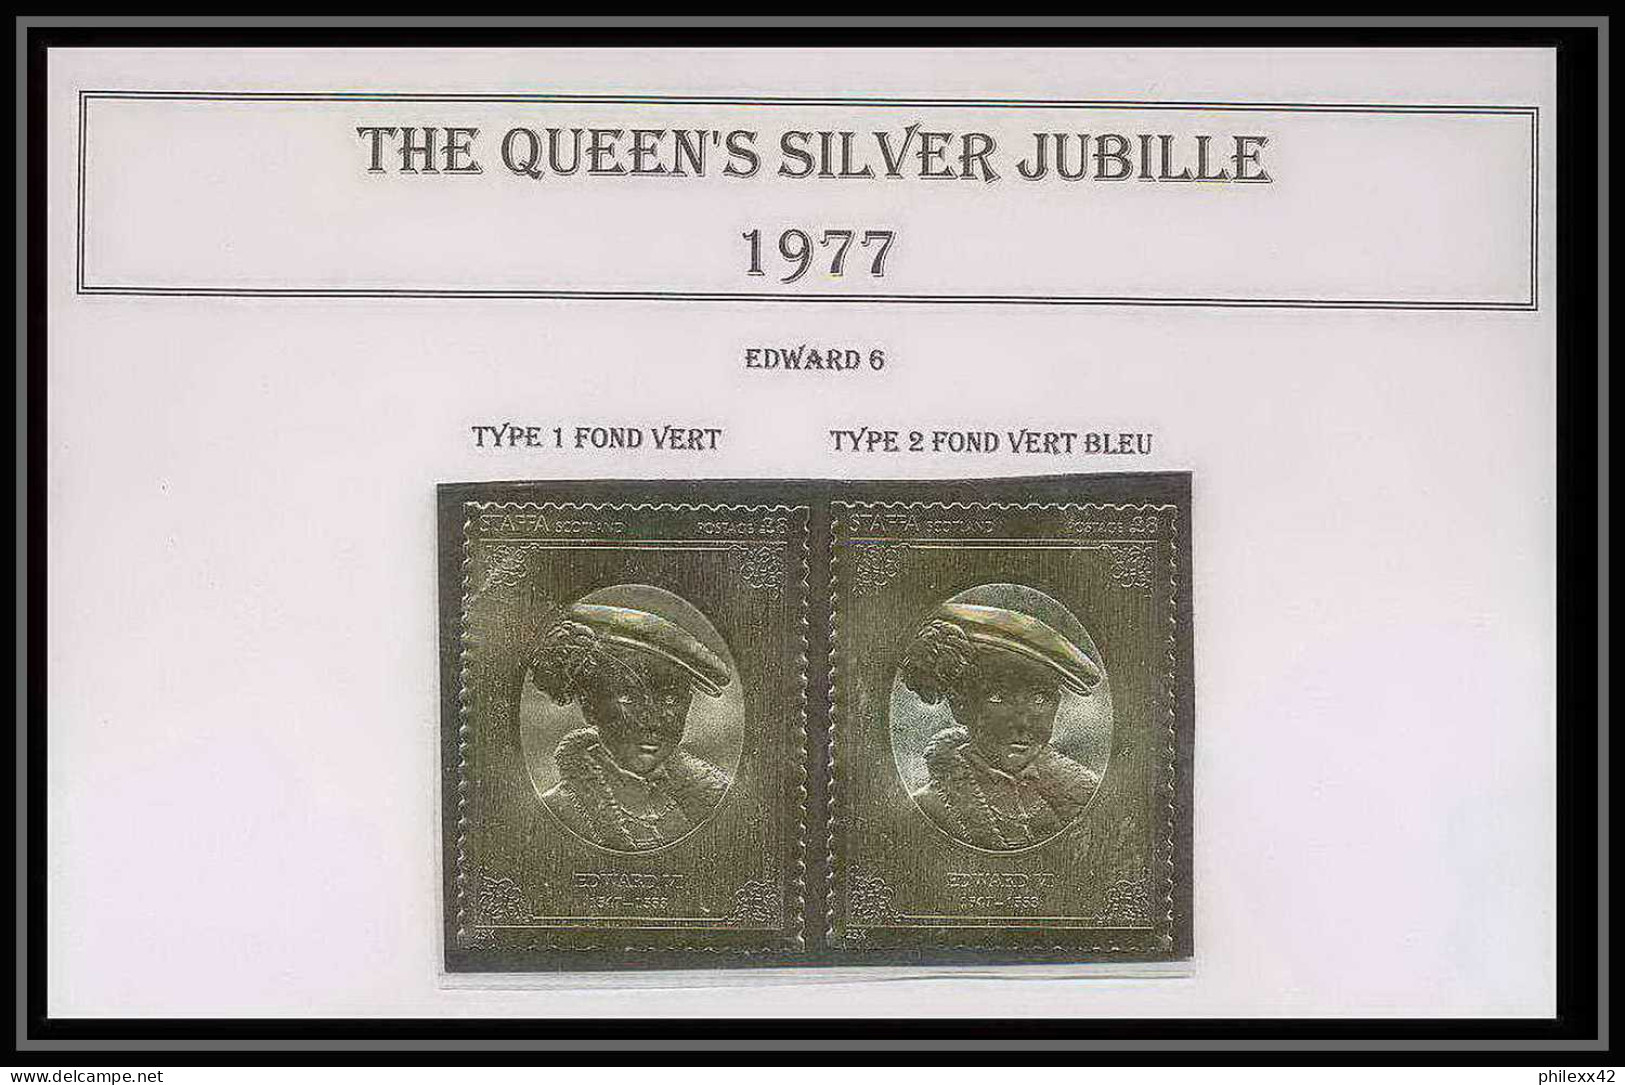 460 Staffa Scotland The Queen's Silver Jubilee 1977 OR Gold Stamps Monarchy United Kingdom Edward 6 Type 1&2 Neuf** Mnh - Local Issues